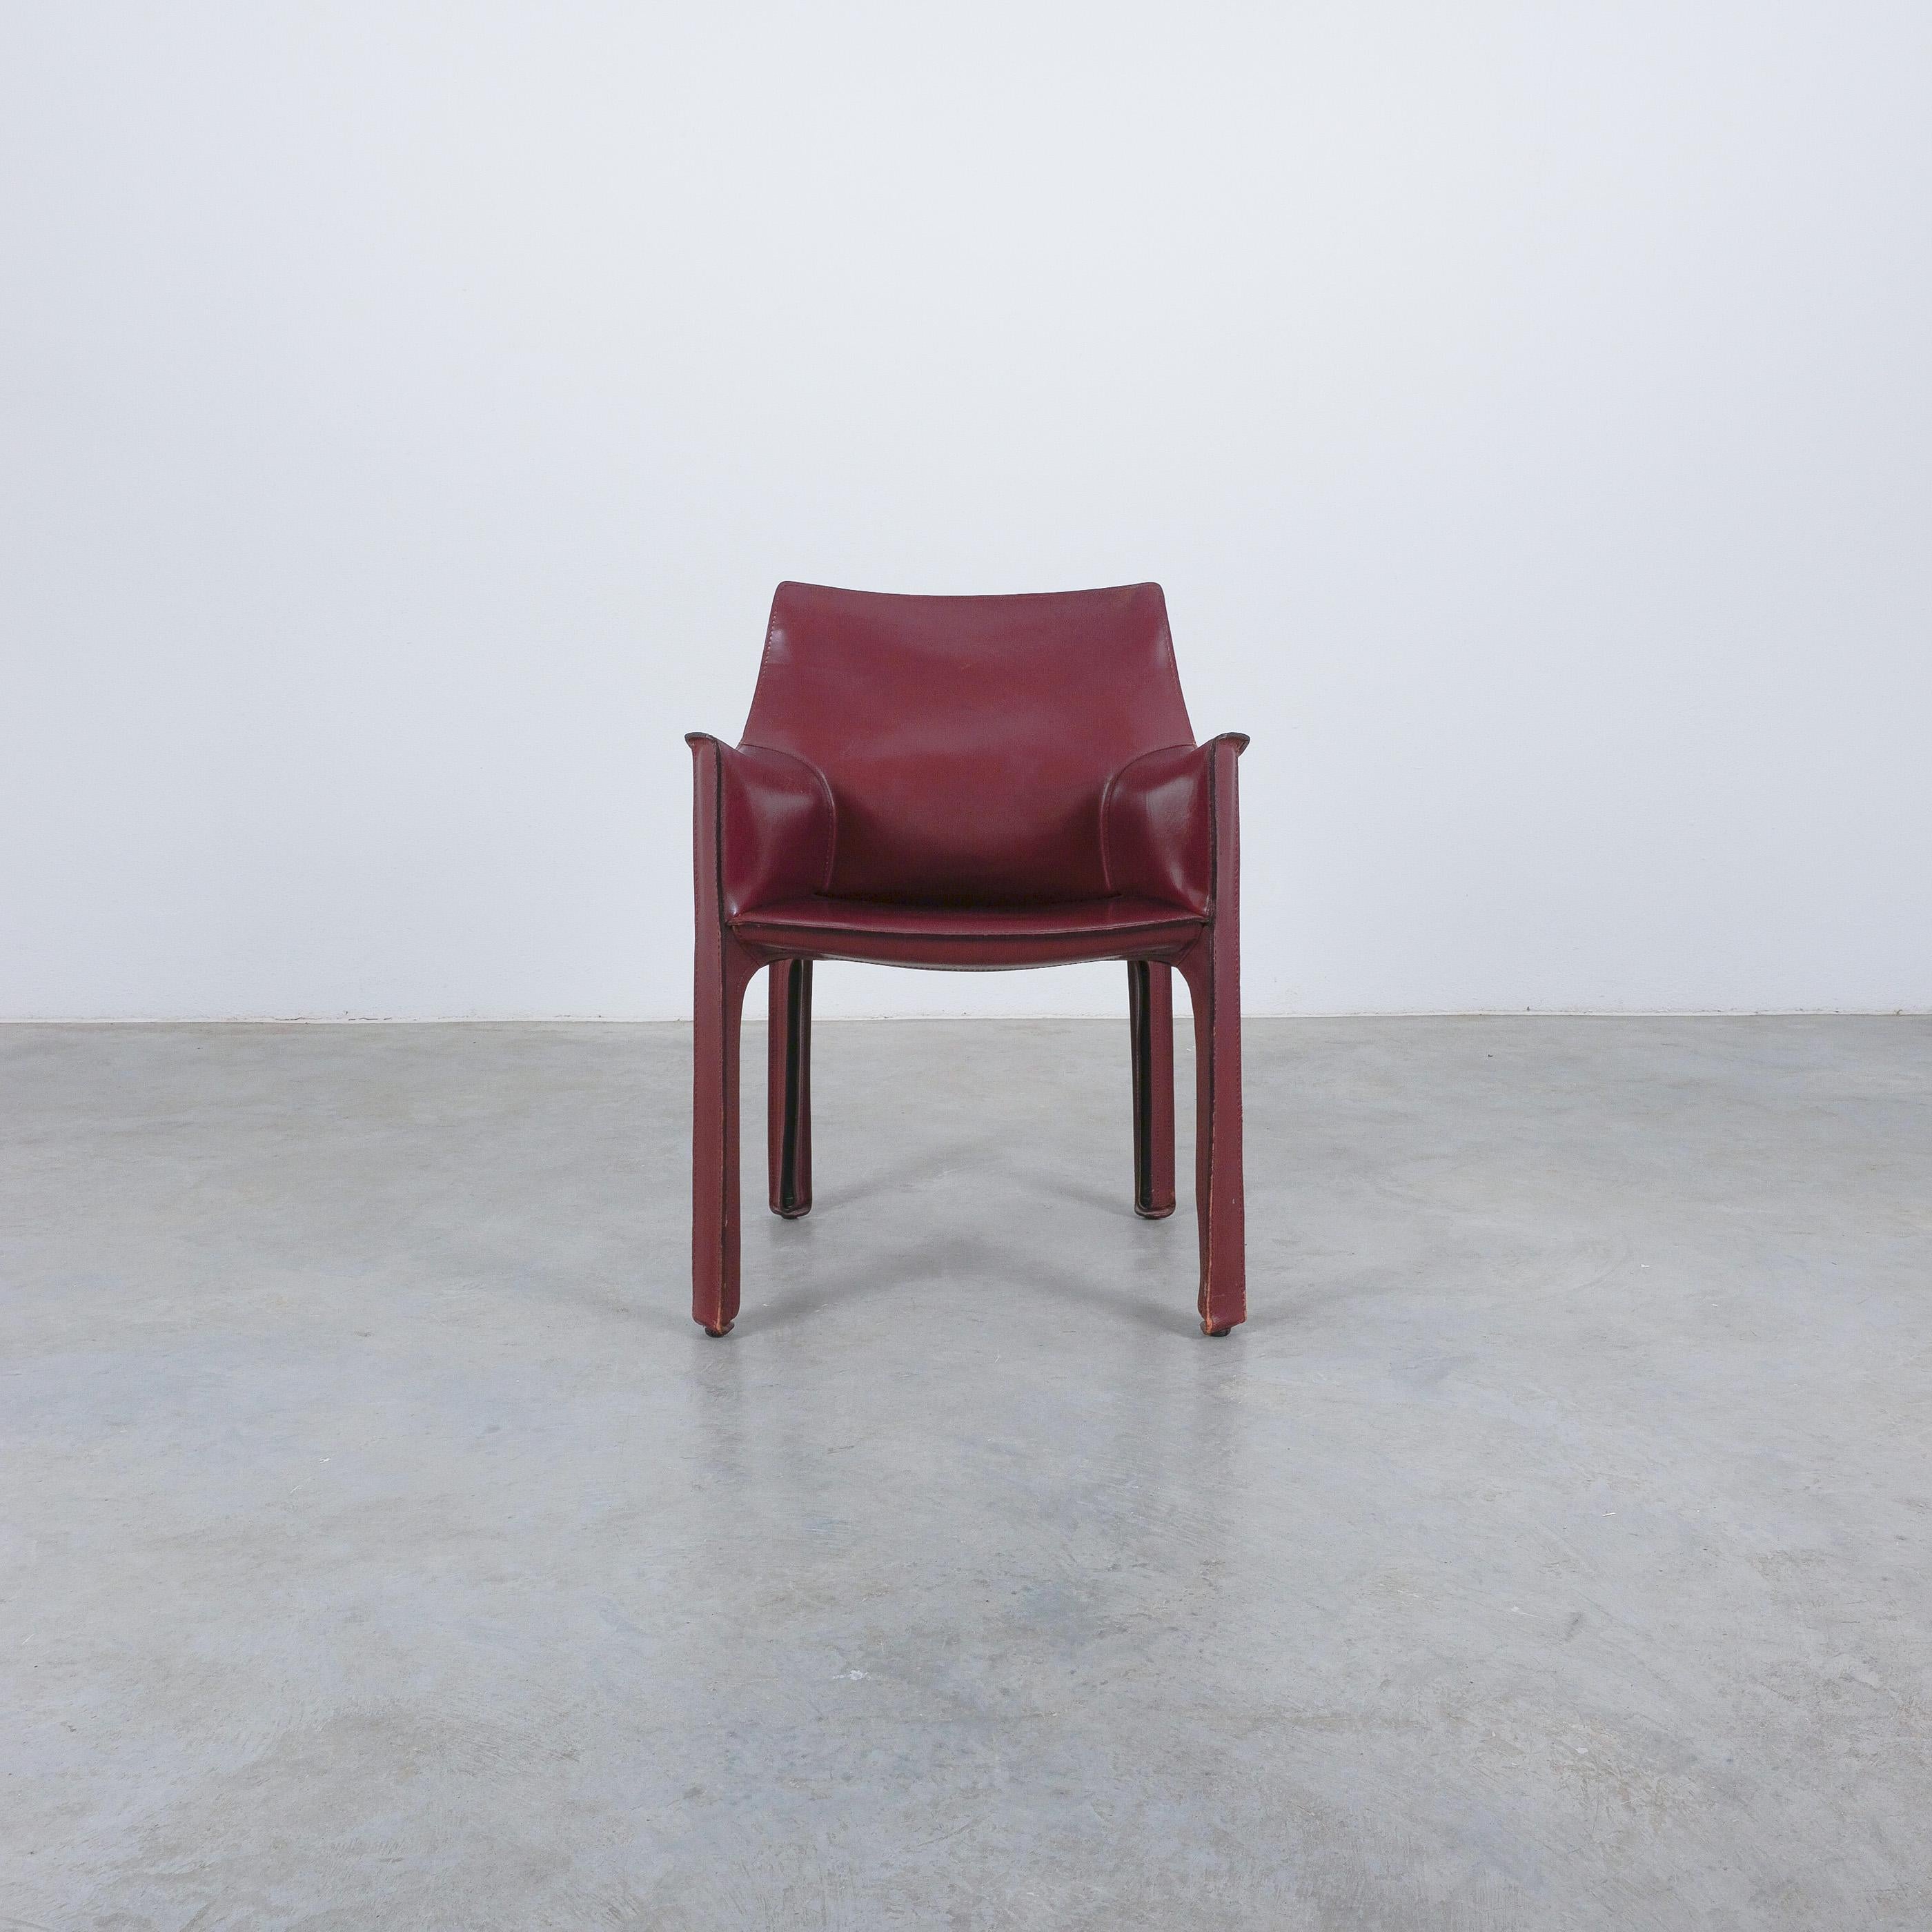 Mario Bellini Cassina Cab 413 Burgundy Red Leather Dining Chairs, 1980 for Cassina- Two chairs available and sold as a pair.
We have a set of 9 oxblood colored cab412 and cab413 available also, please check our other listings.

A nice pair of